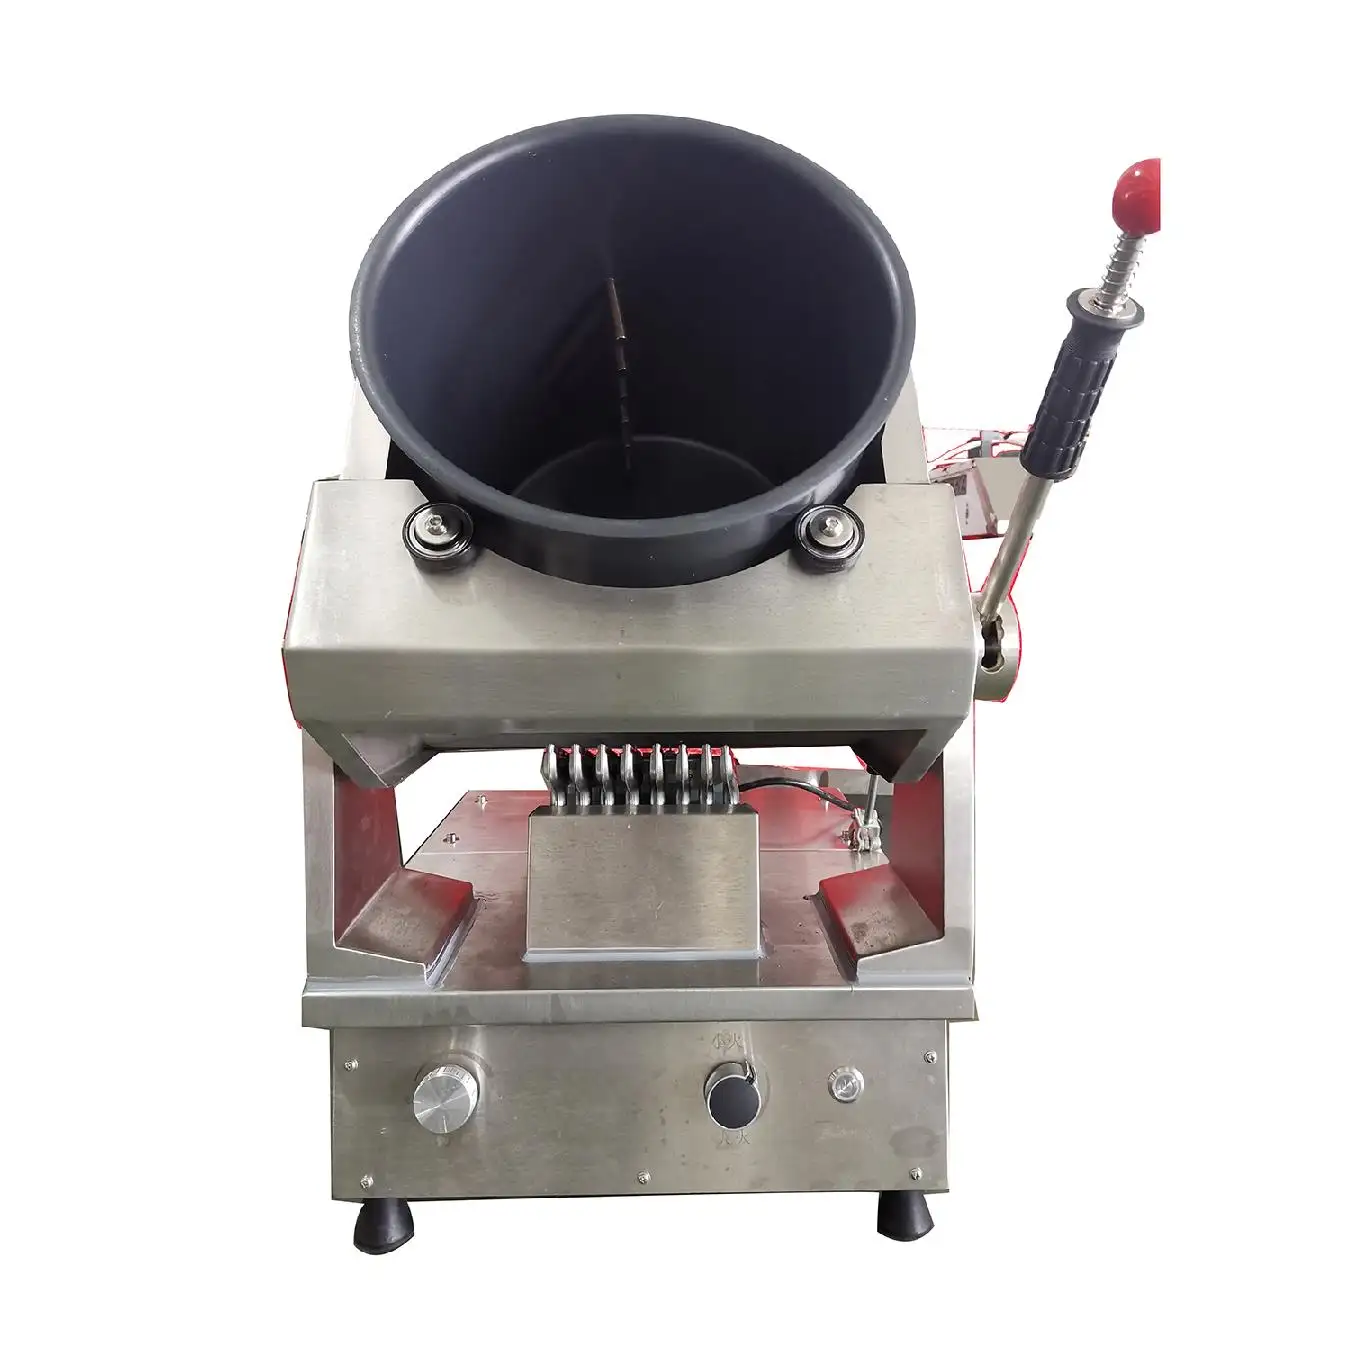 Chinese Restaurant Kitchen Use Cooker Robot Food Automatic Cooking Wok Automatic Stir Fry Machine